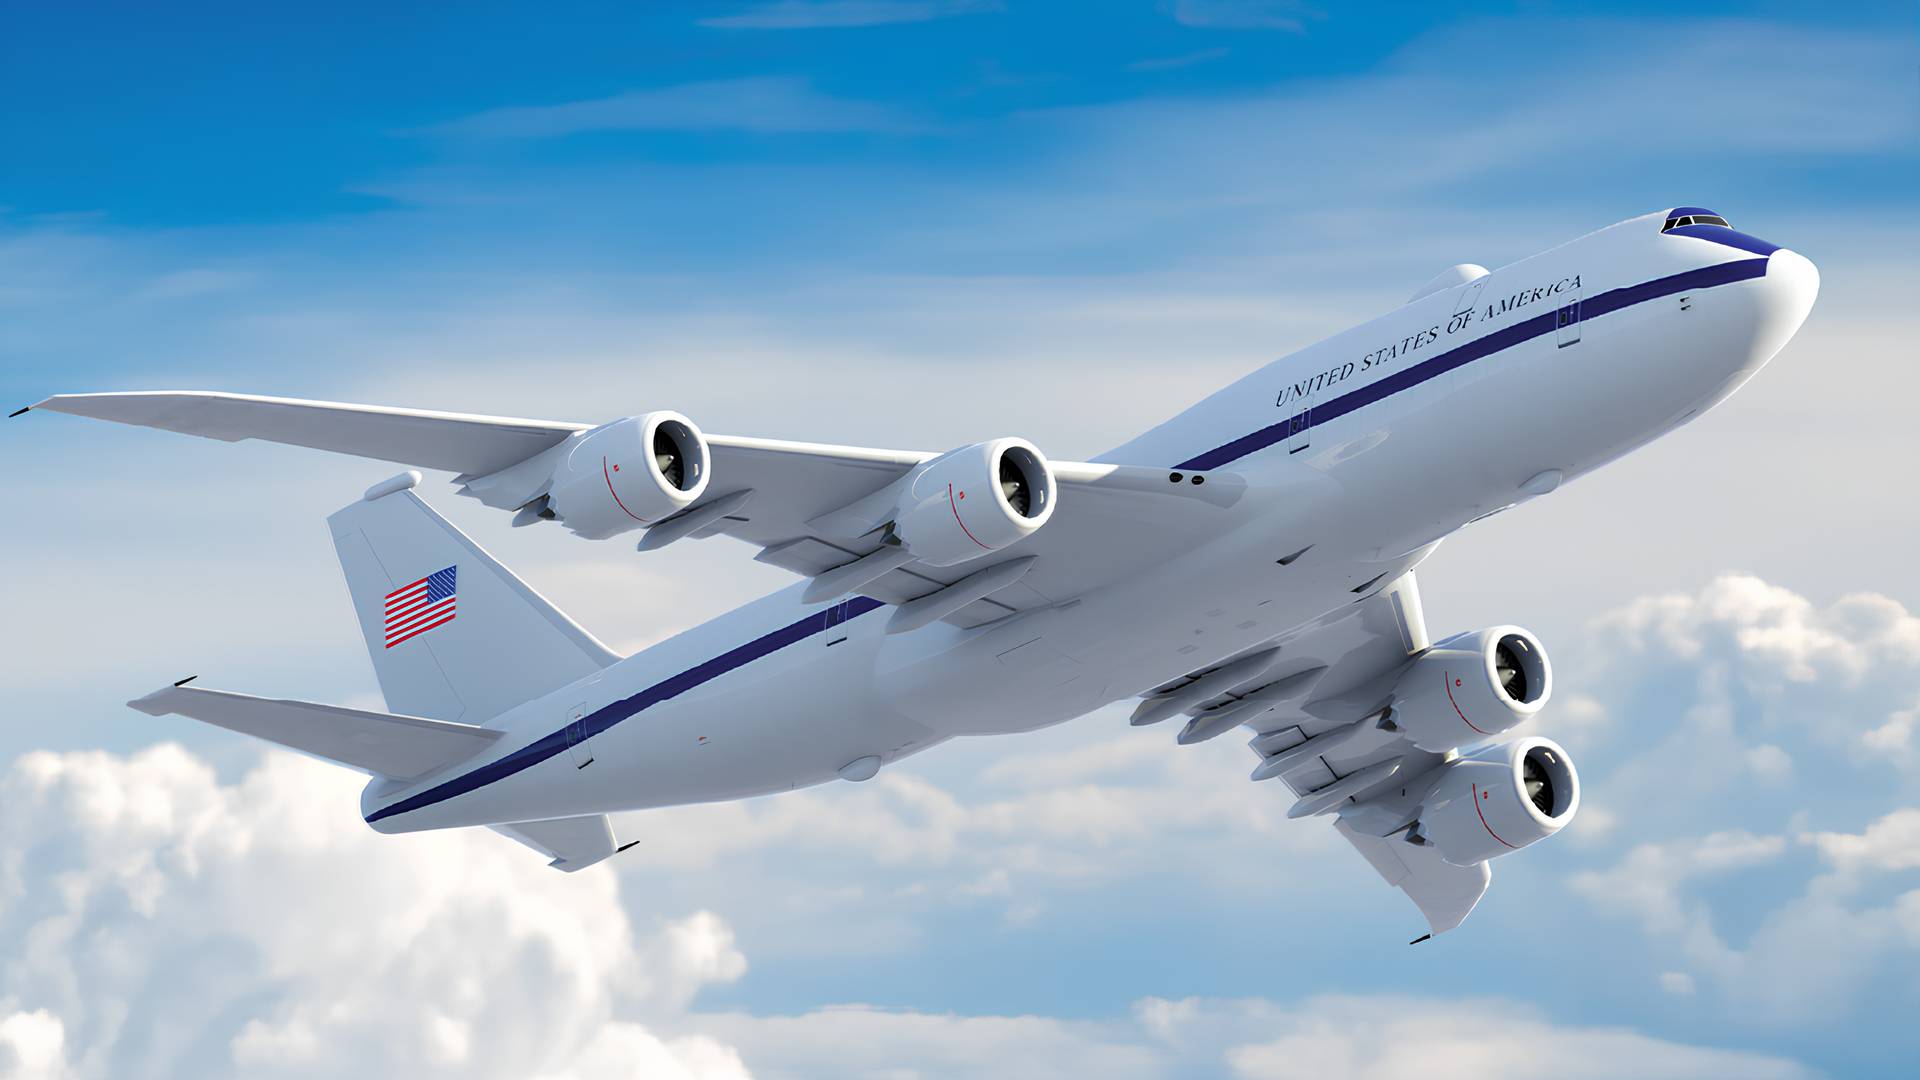 Sierra Nevada Corp Wins Next USAF Doomsday Plane Contract